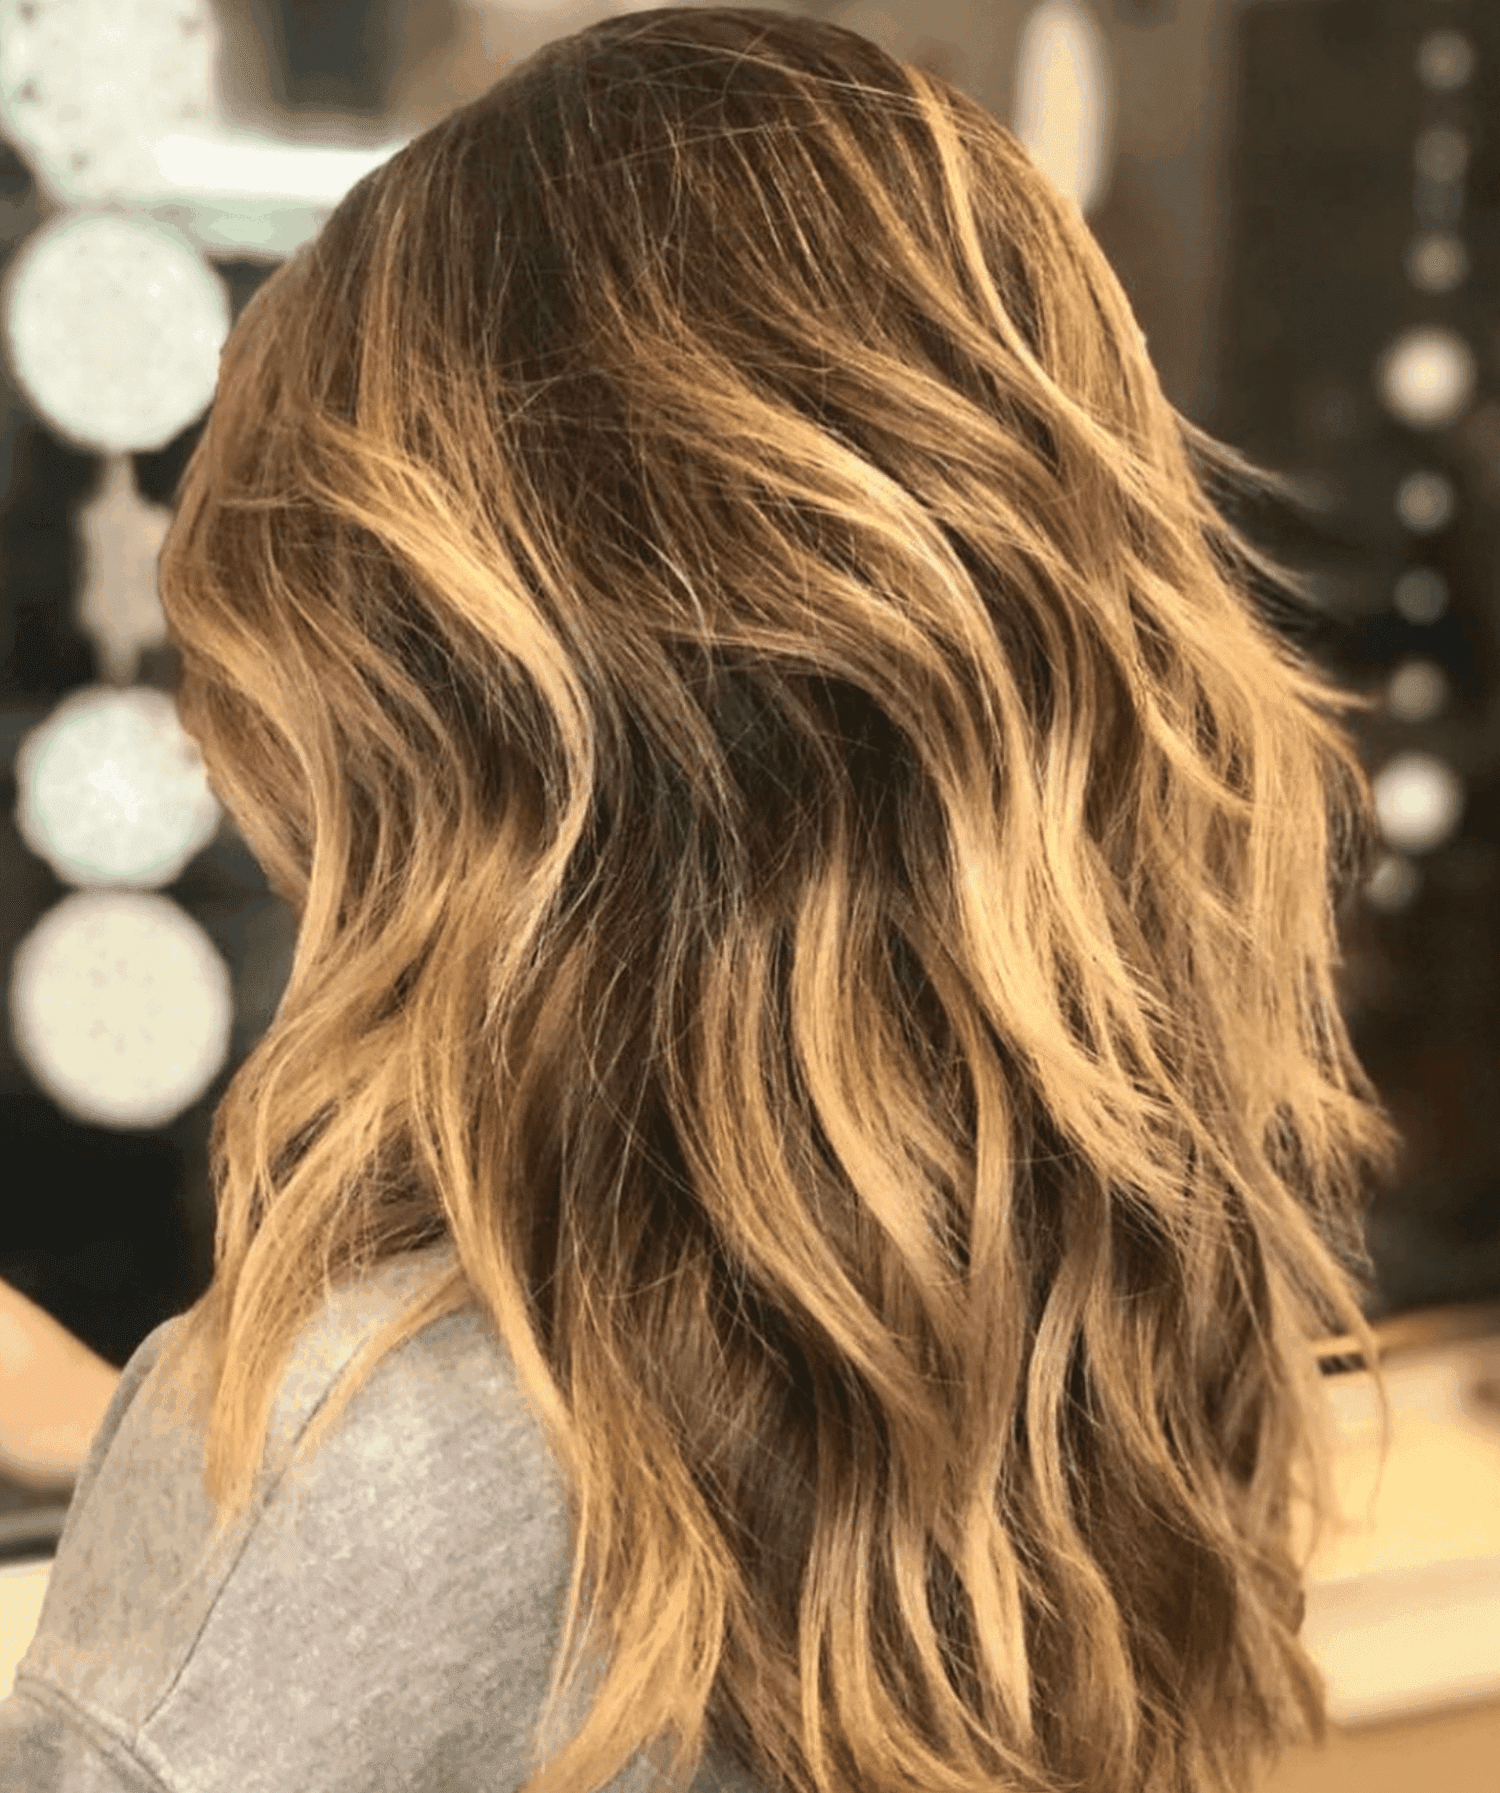 Warm teasylights on layered, mid-length hair, viewed from the back